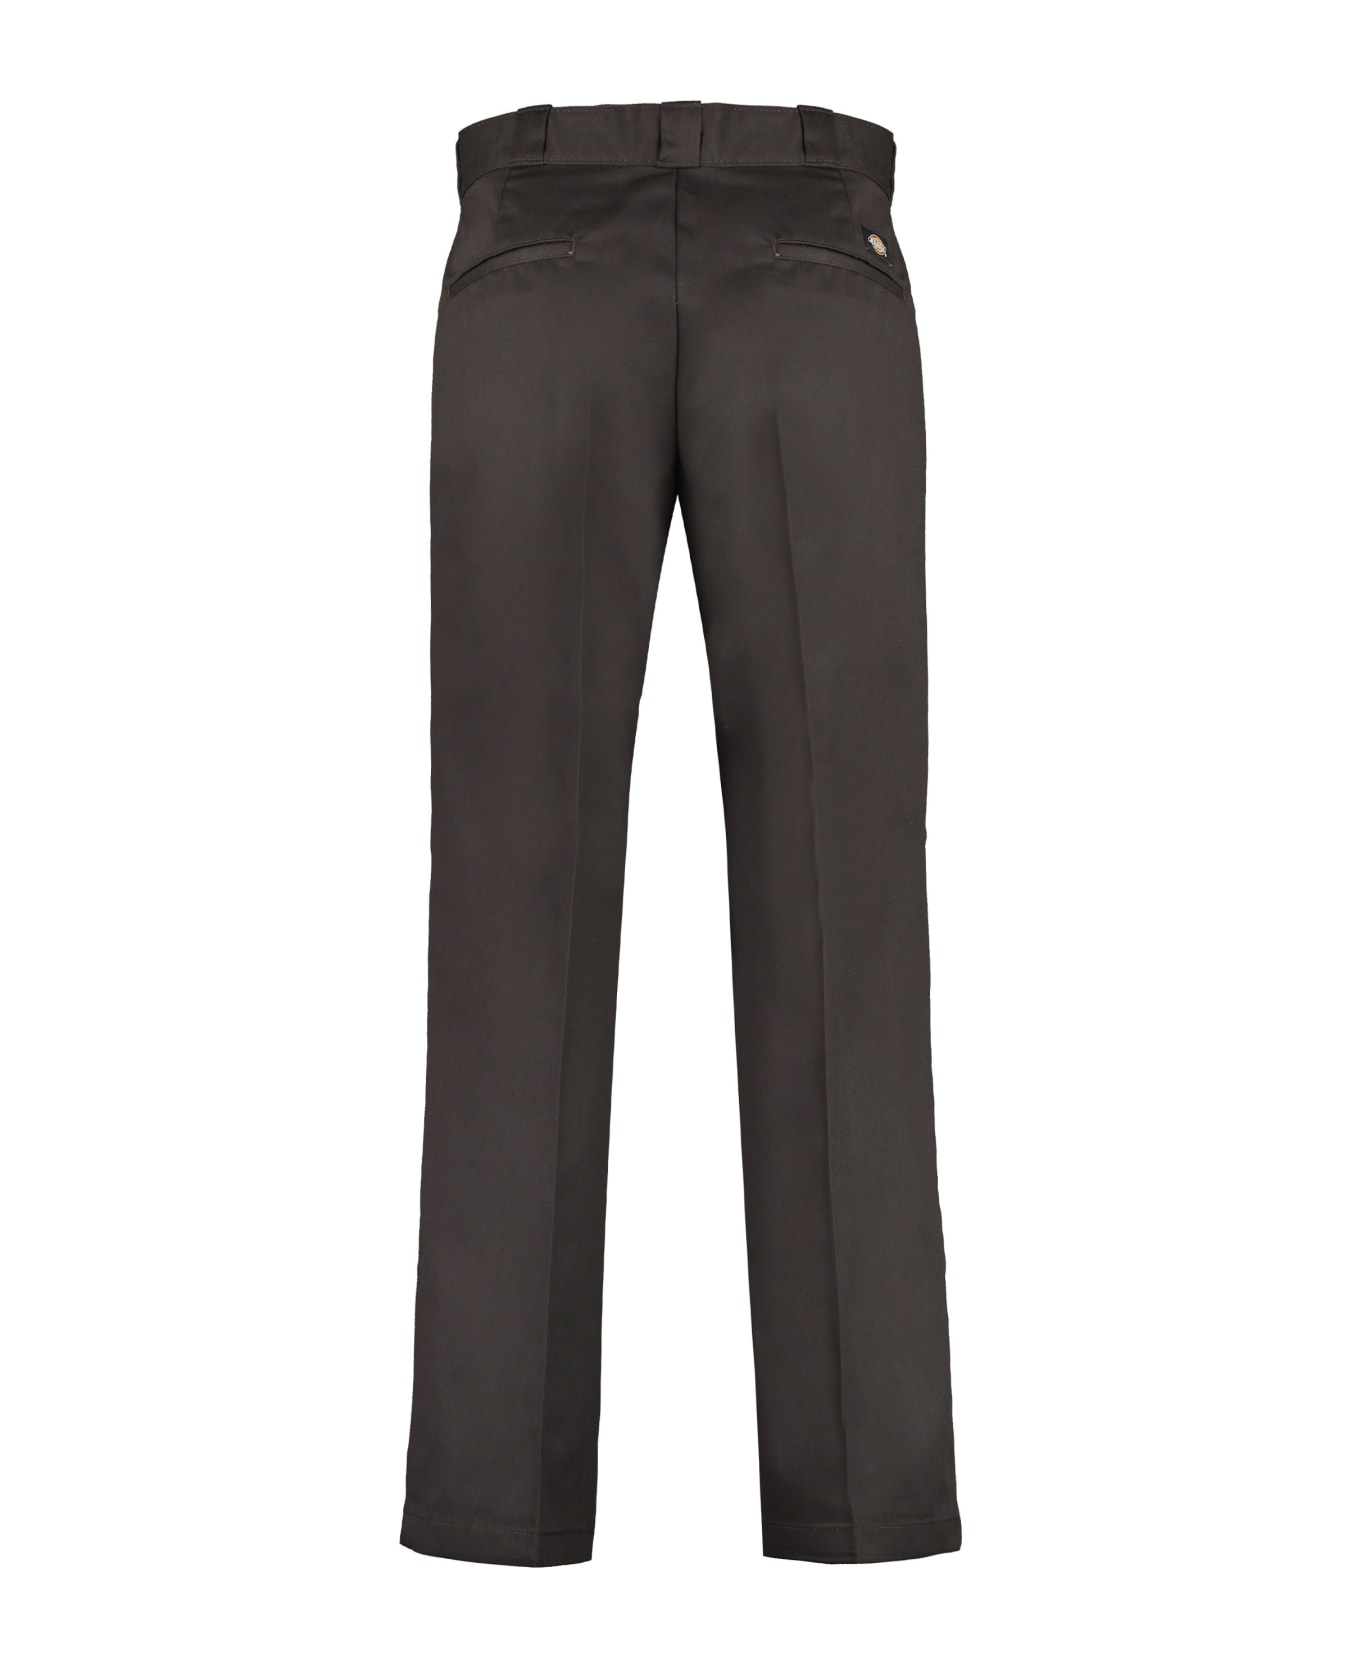 Dickies 874 Cotton-blend Trousers - brown ボトムス